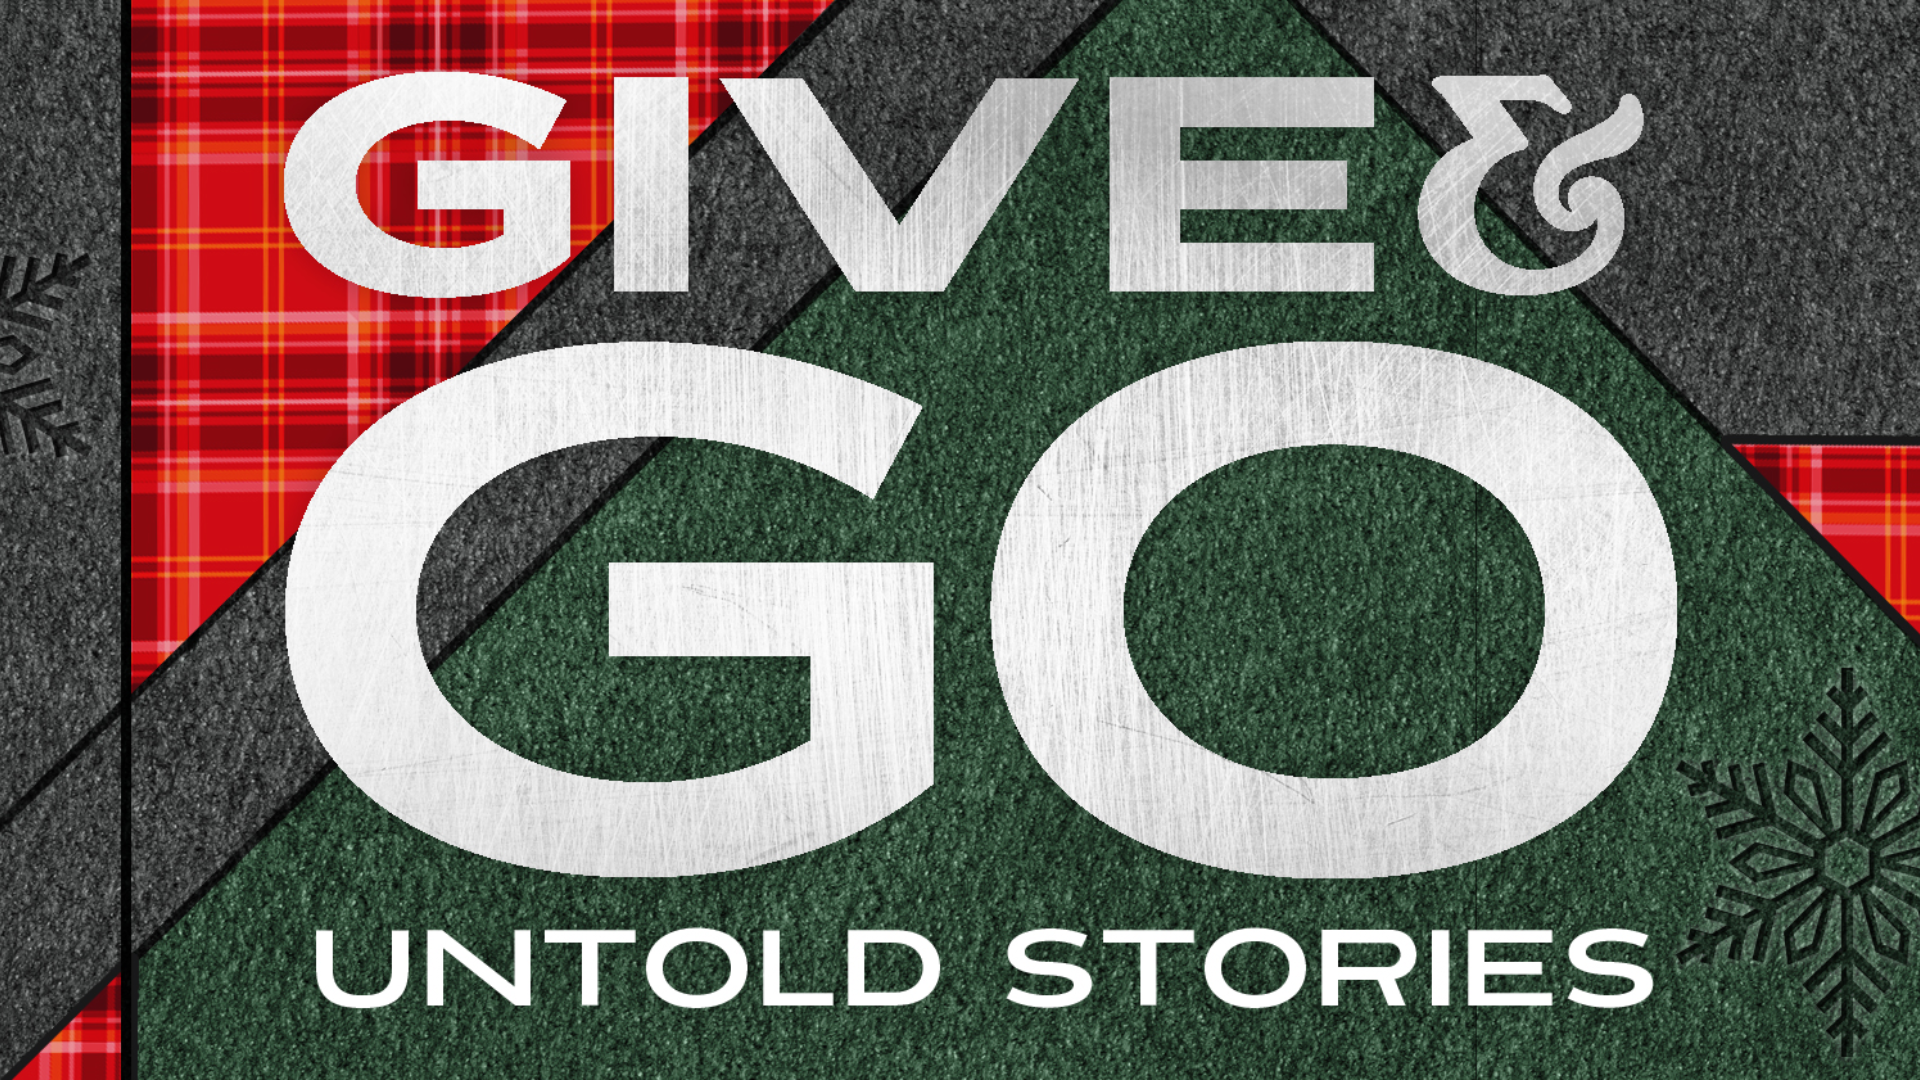 Give & Go: Have You Been Told Our Untold Stories? Hero Image